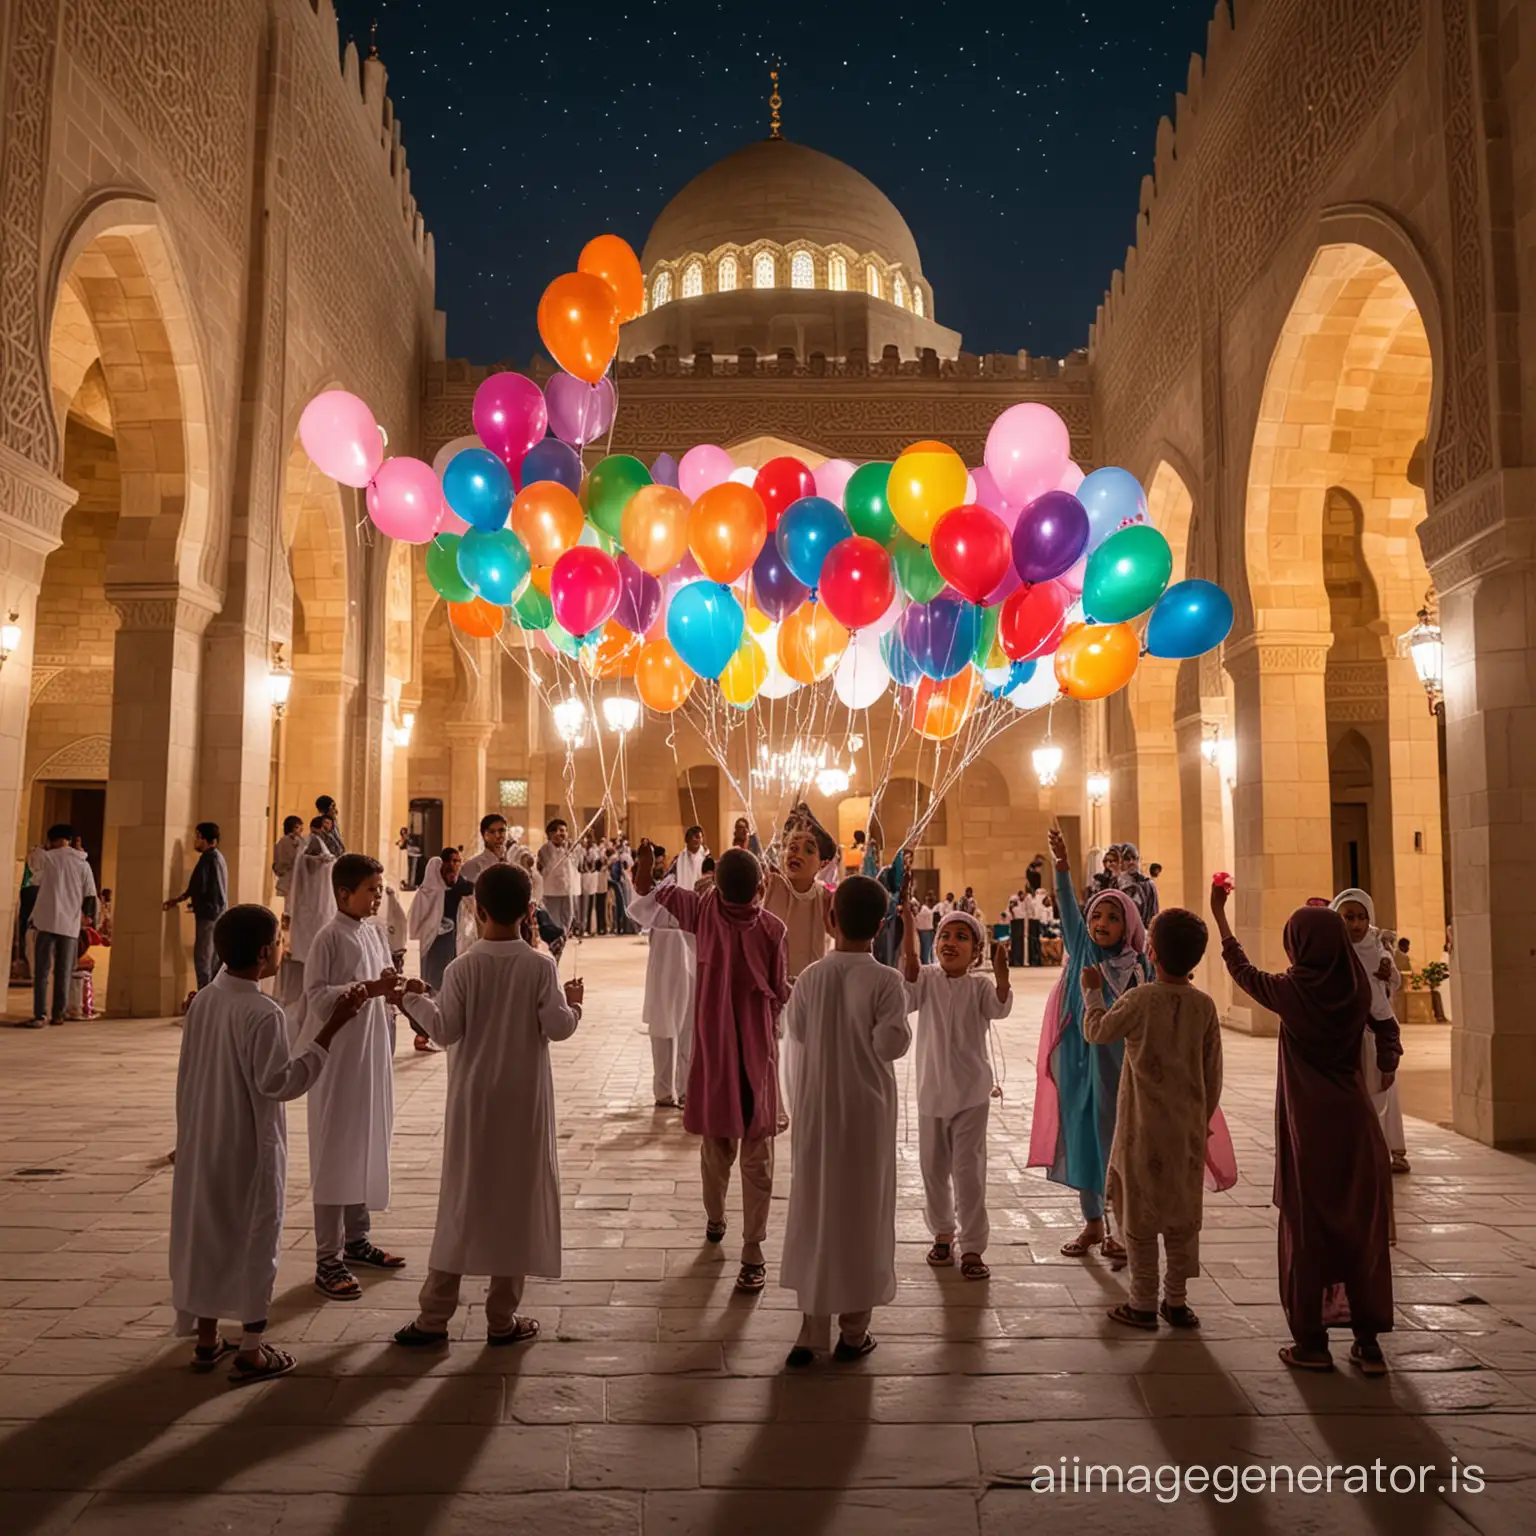 many Happy Arab children holding balloons and candy for Islamic events like Eid ul Fitr in a mosque courtyard at night